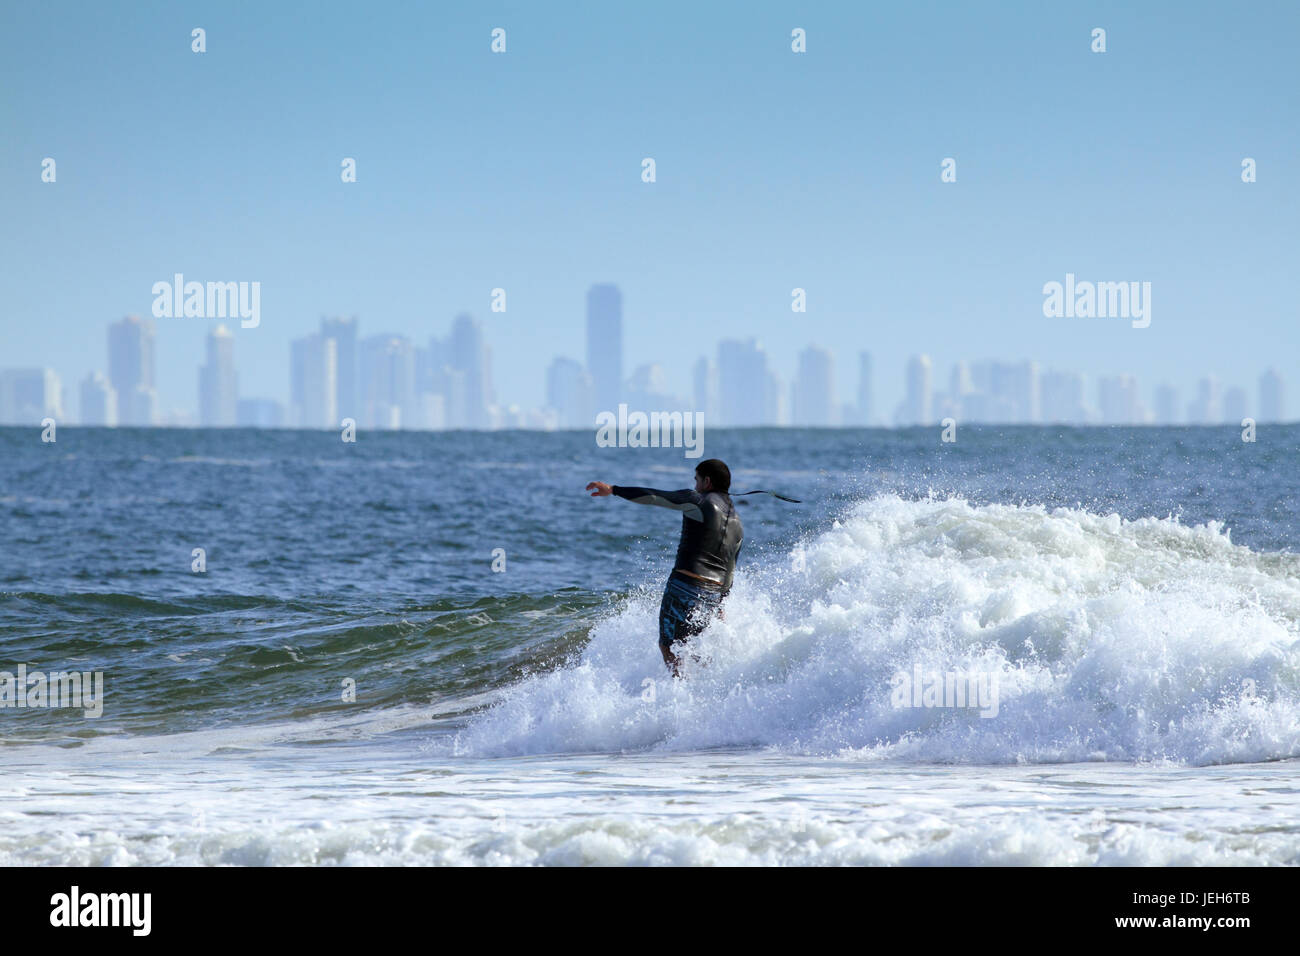 A man surfing with Surfers Paradise in the background. Stock Photo